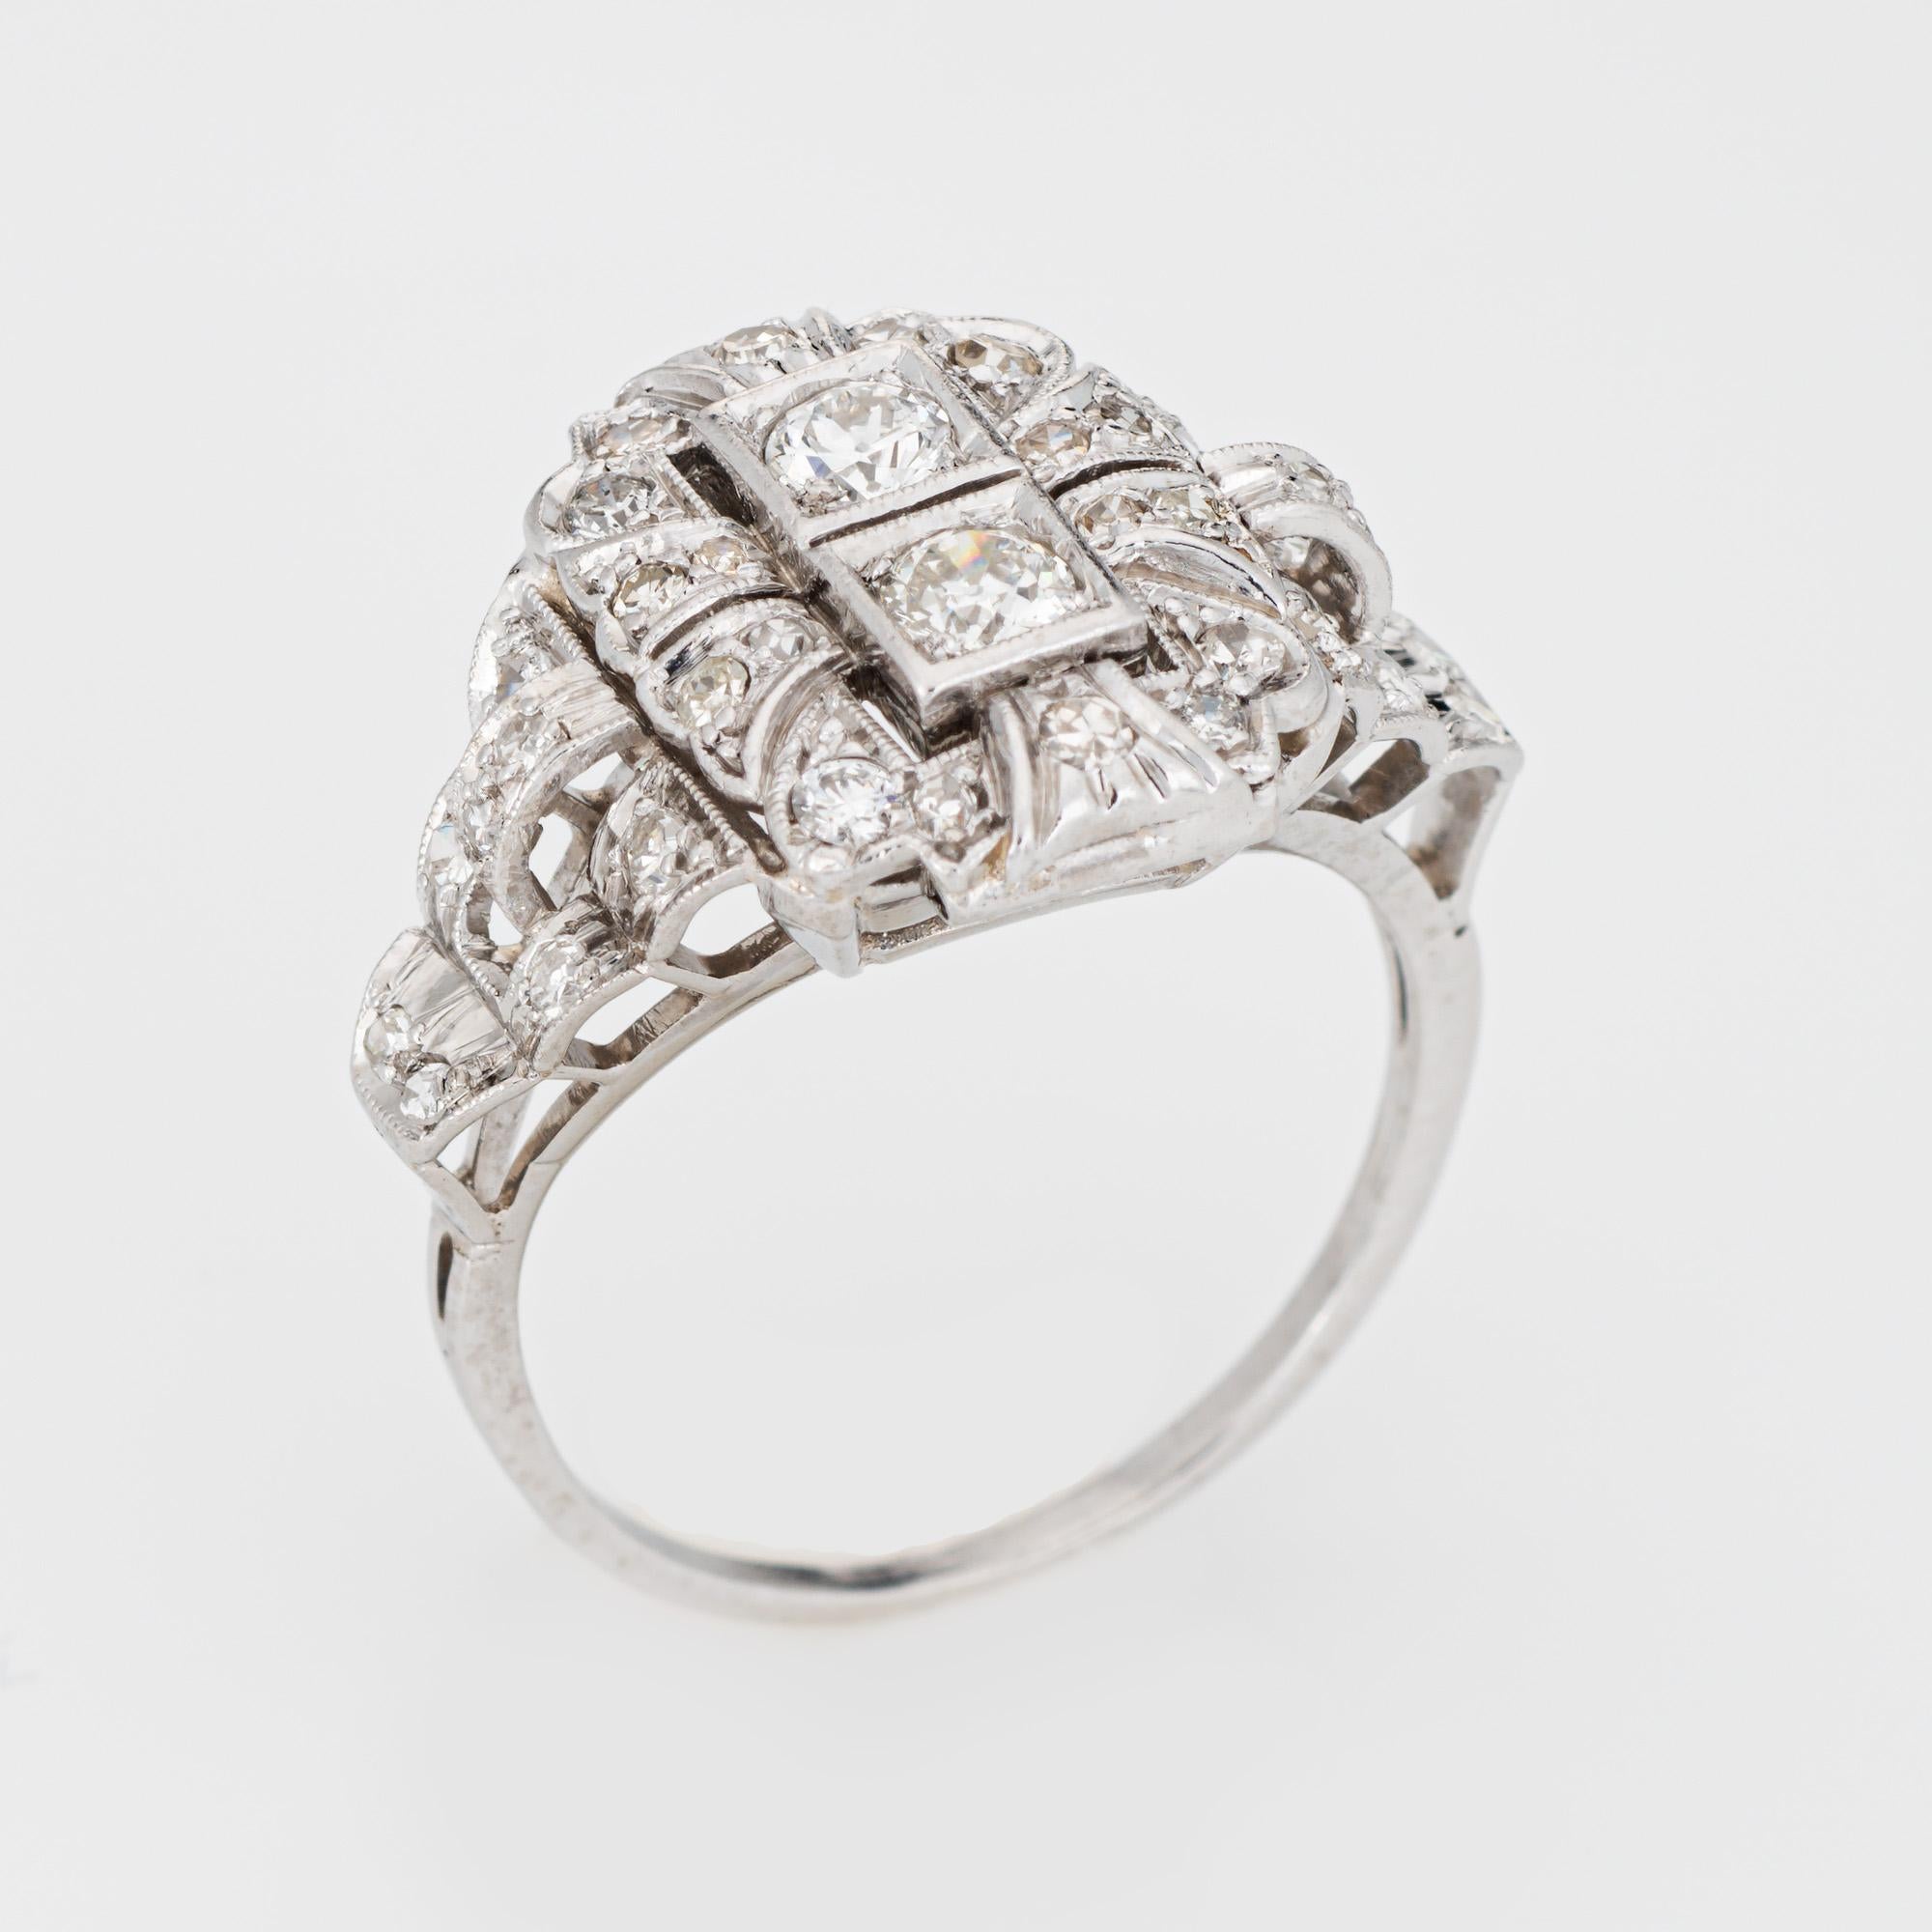 Elegant & finely detailed Art Deco era ring (circa 1920s to 1930s), crafted in 900 platinum. 

Two centrally mounted estimated 0.20 carat (each) Old European cut diamonds are accented with an estimated 0.34 carats of single cut diamonds. The total